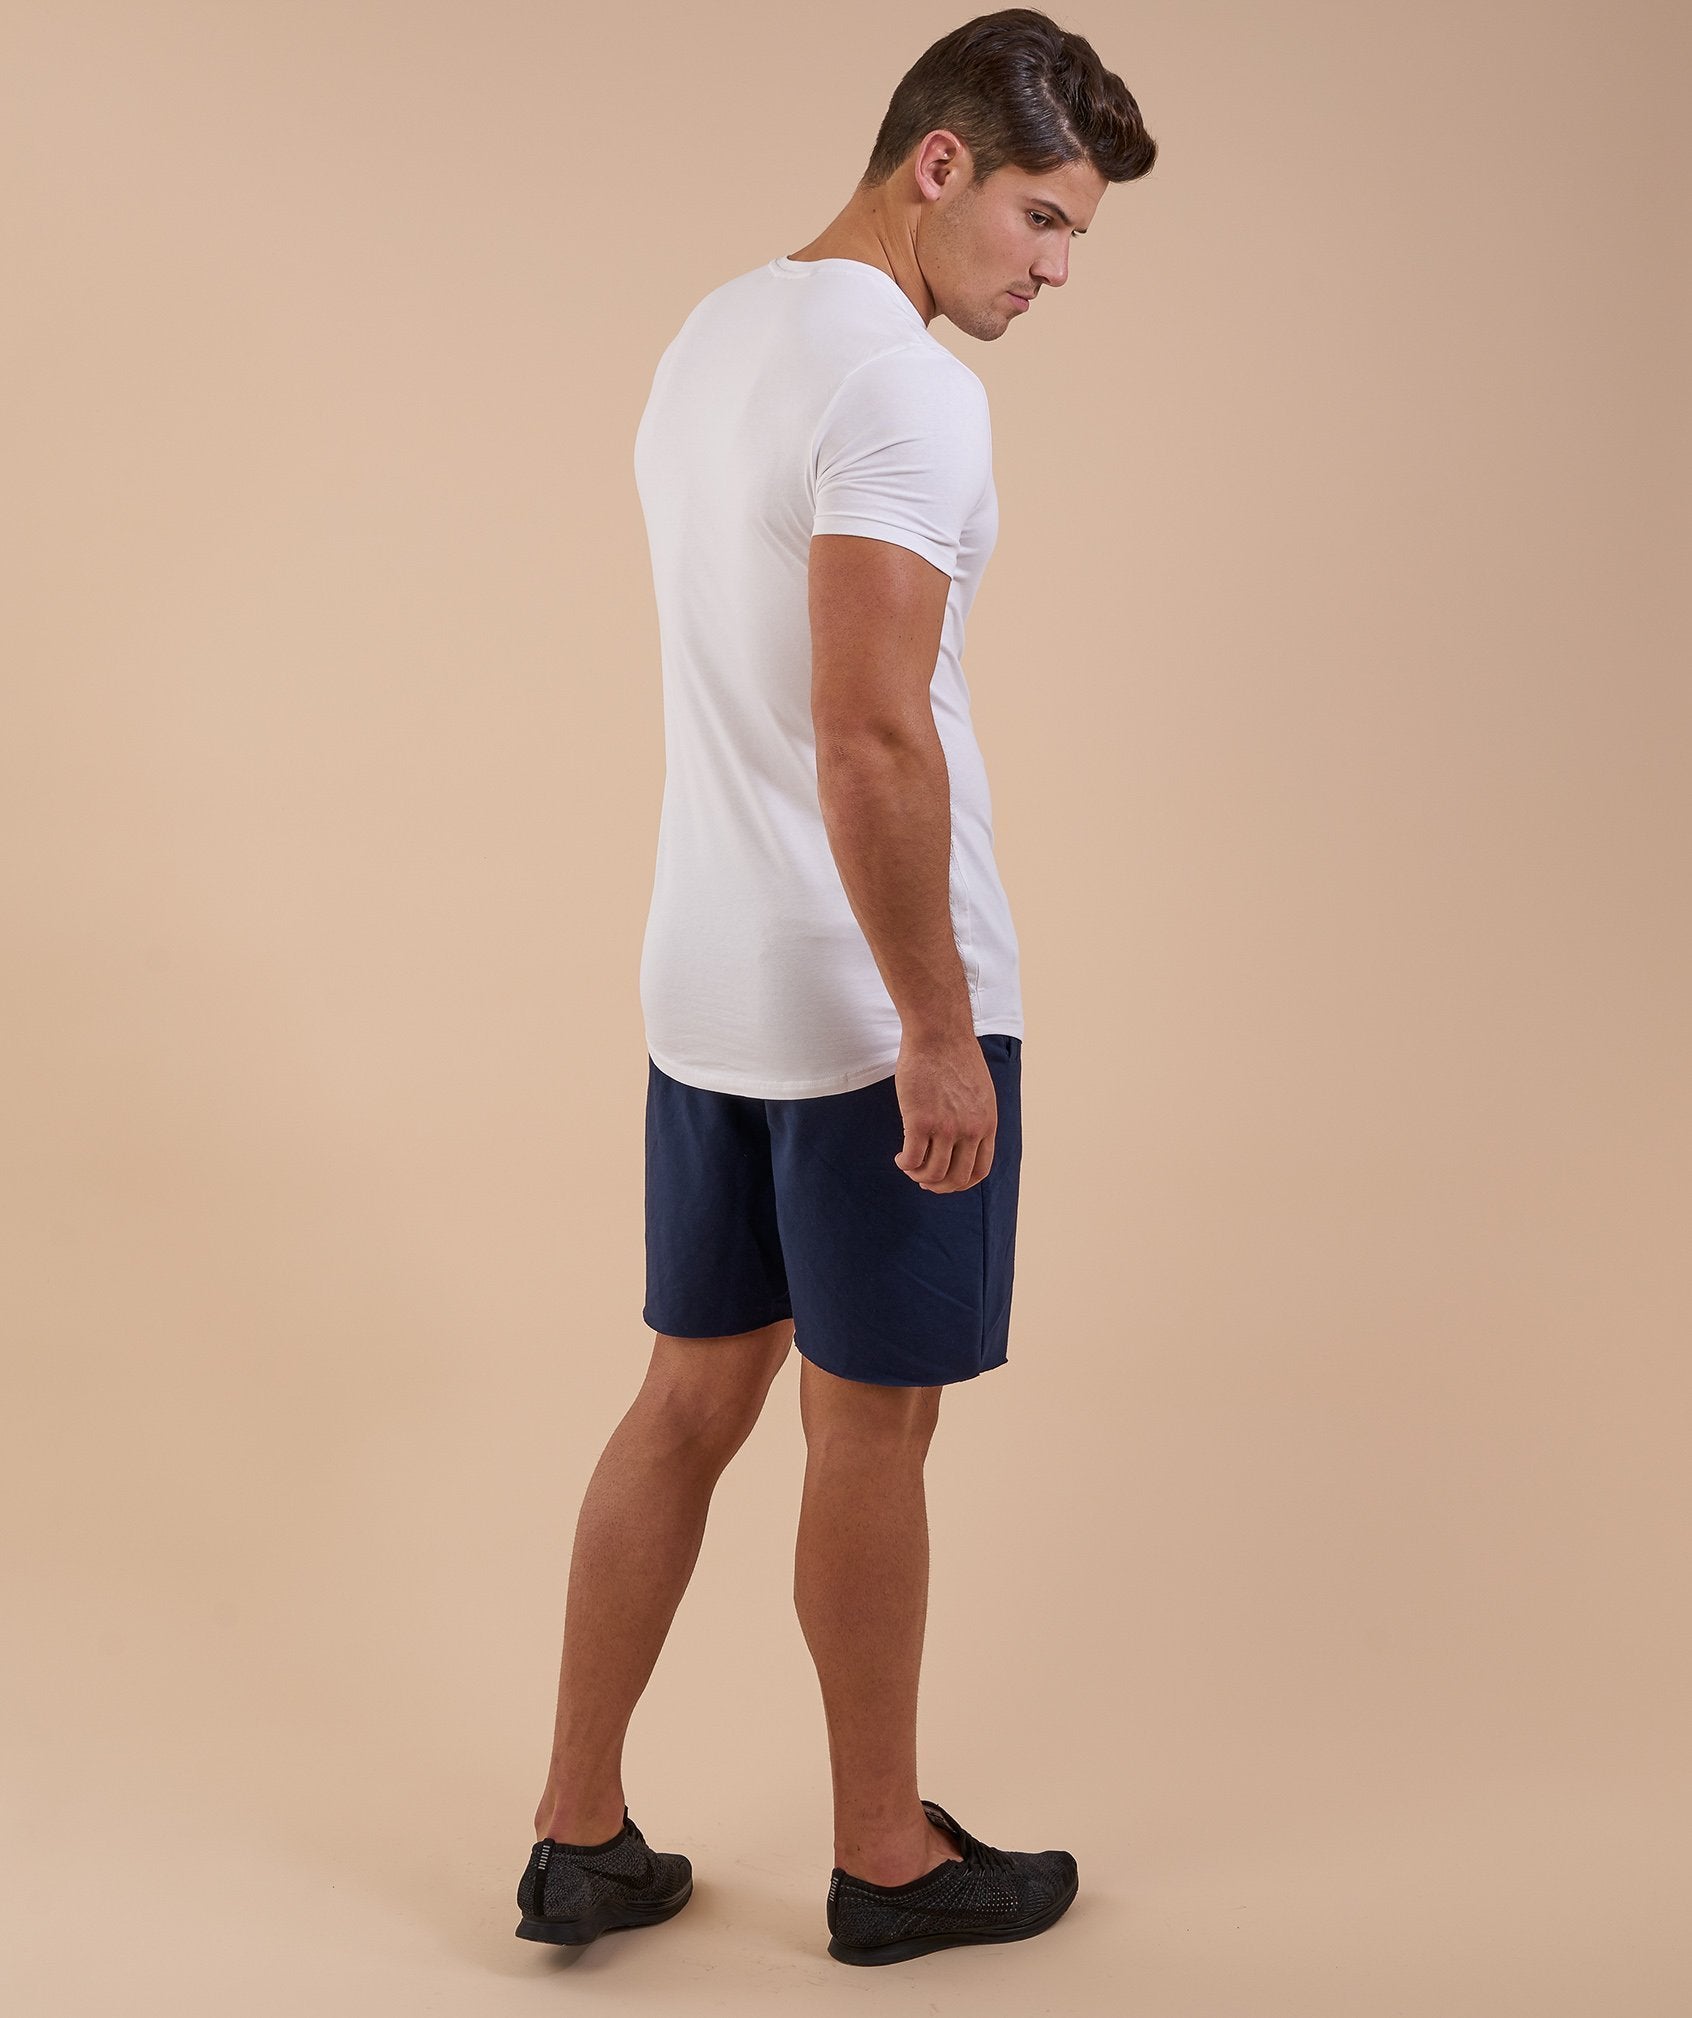 Solace Longline T-Shirt in White - view 6